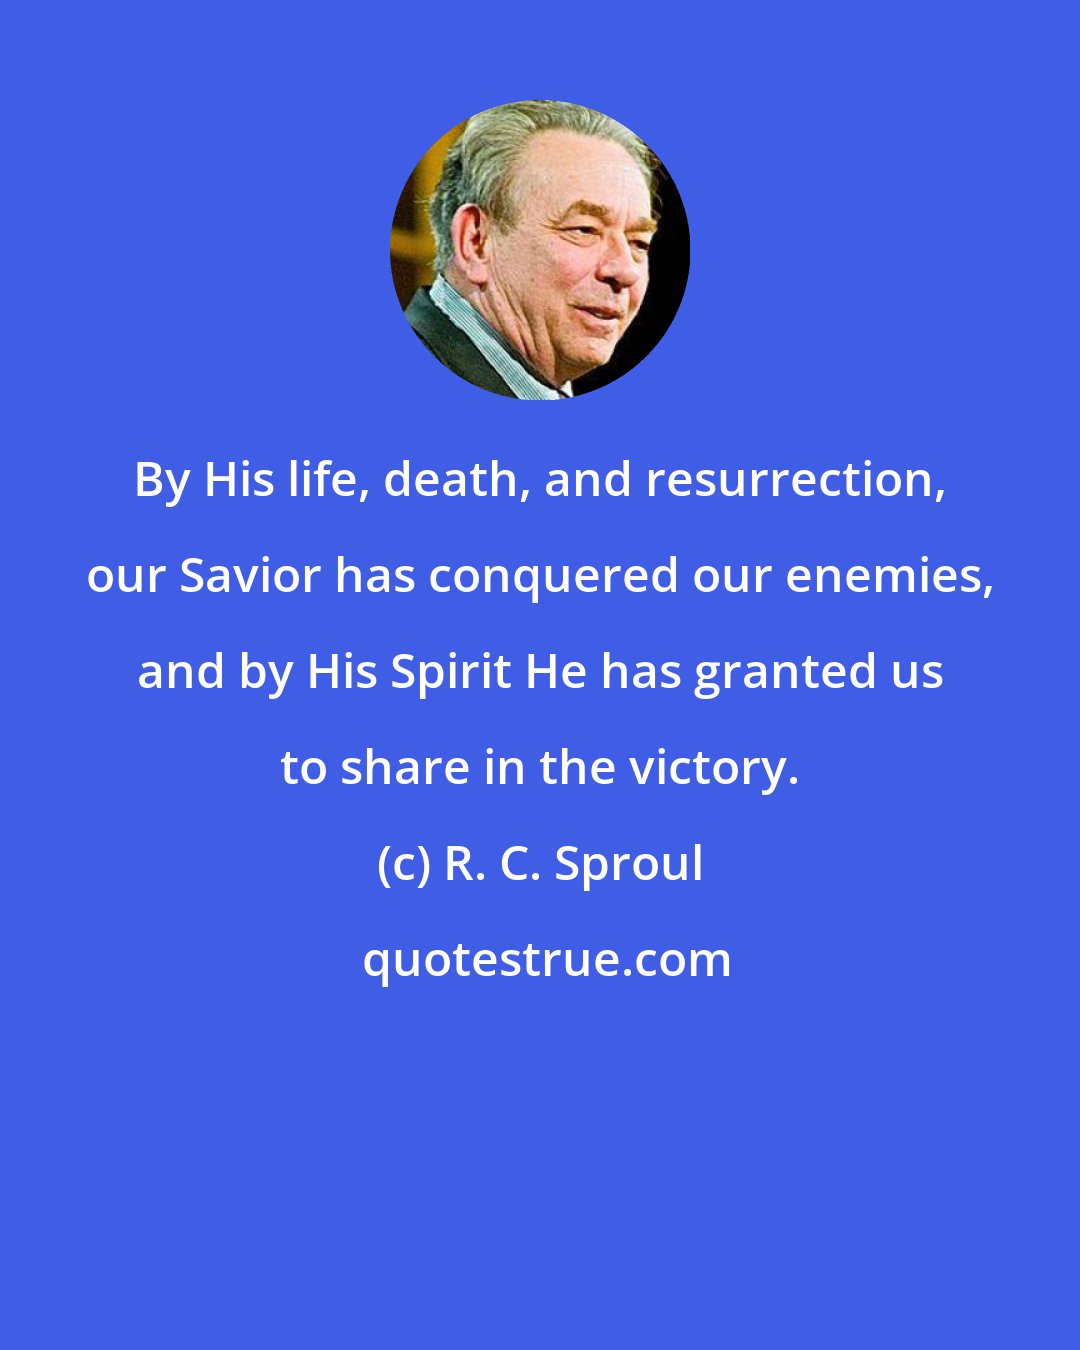 R. C. Sproul: By His life, death, and resurrection, our Savior has conquered our enemies, and by His Spirit He has granted us to share in the victory.